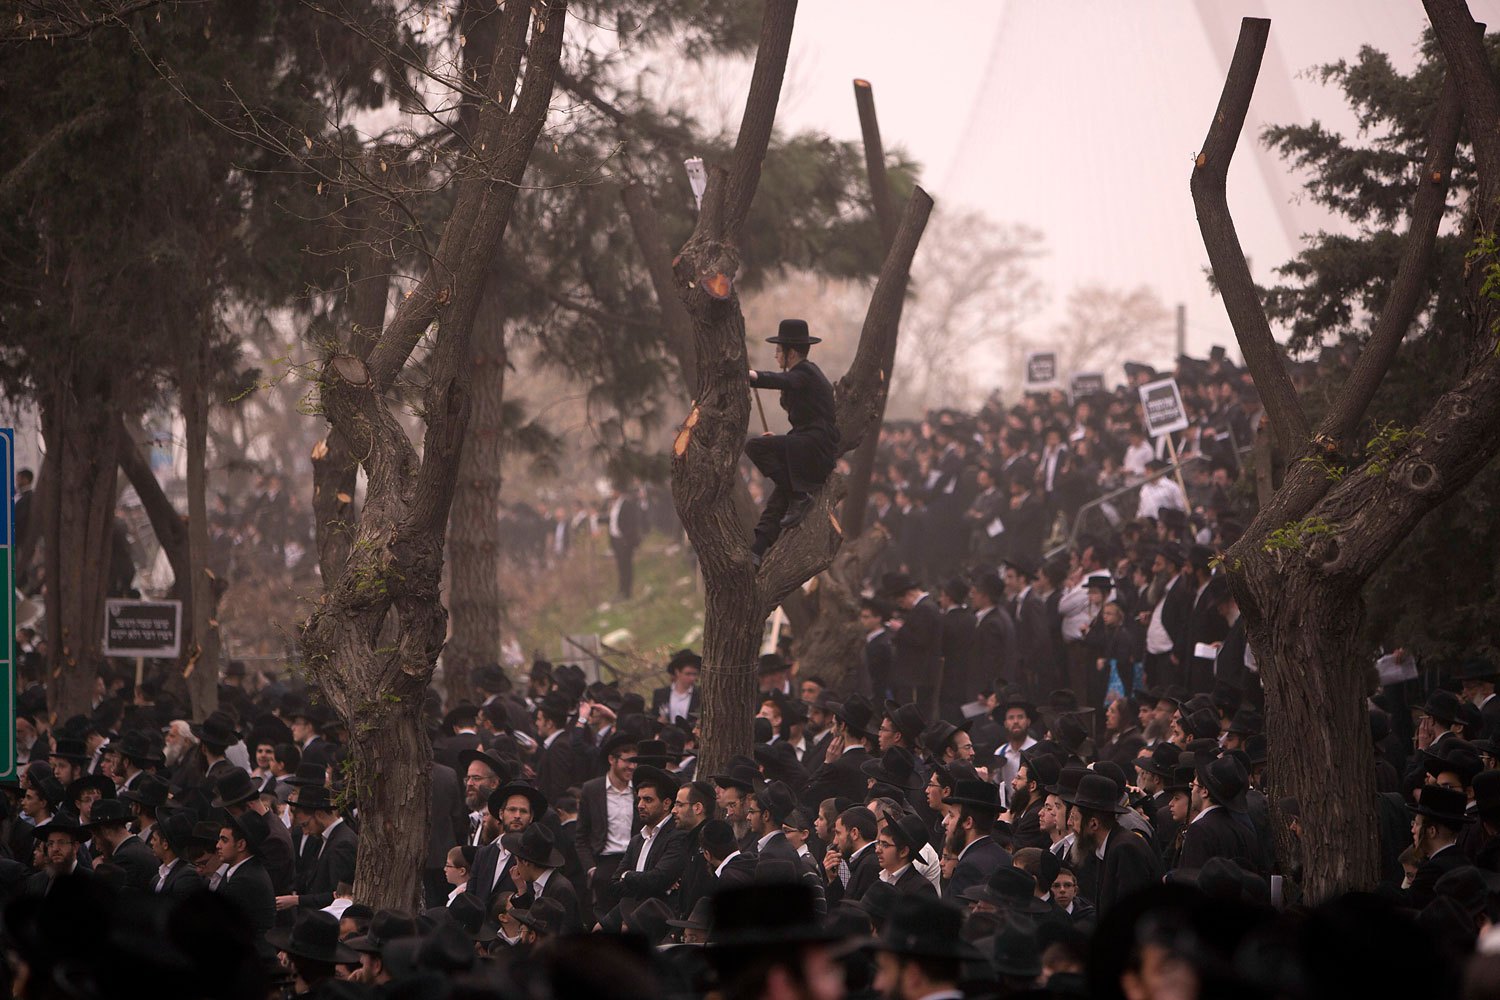 Hundreds of thousands of ultra-Orthodox Jews rally in a massive show of force against plans to force them to serve in the Israeli military, blocking roads and paralyzing the city of Jerusalem, March 2, 2014.